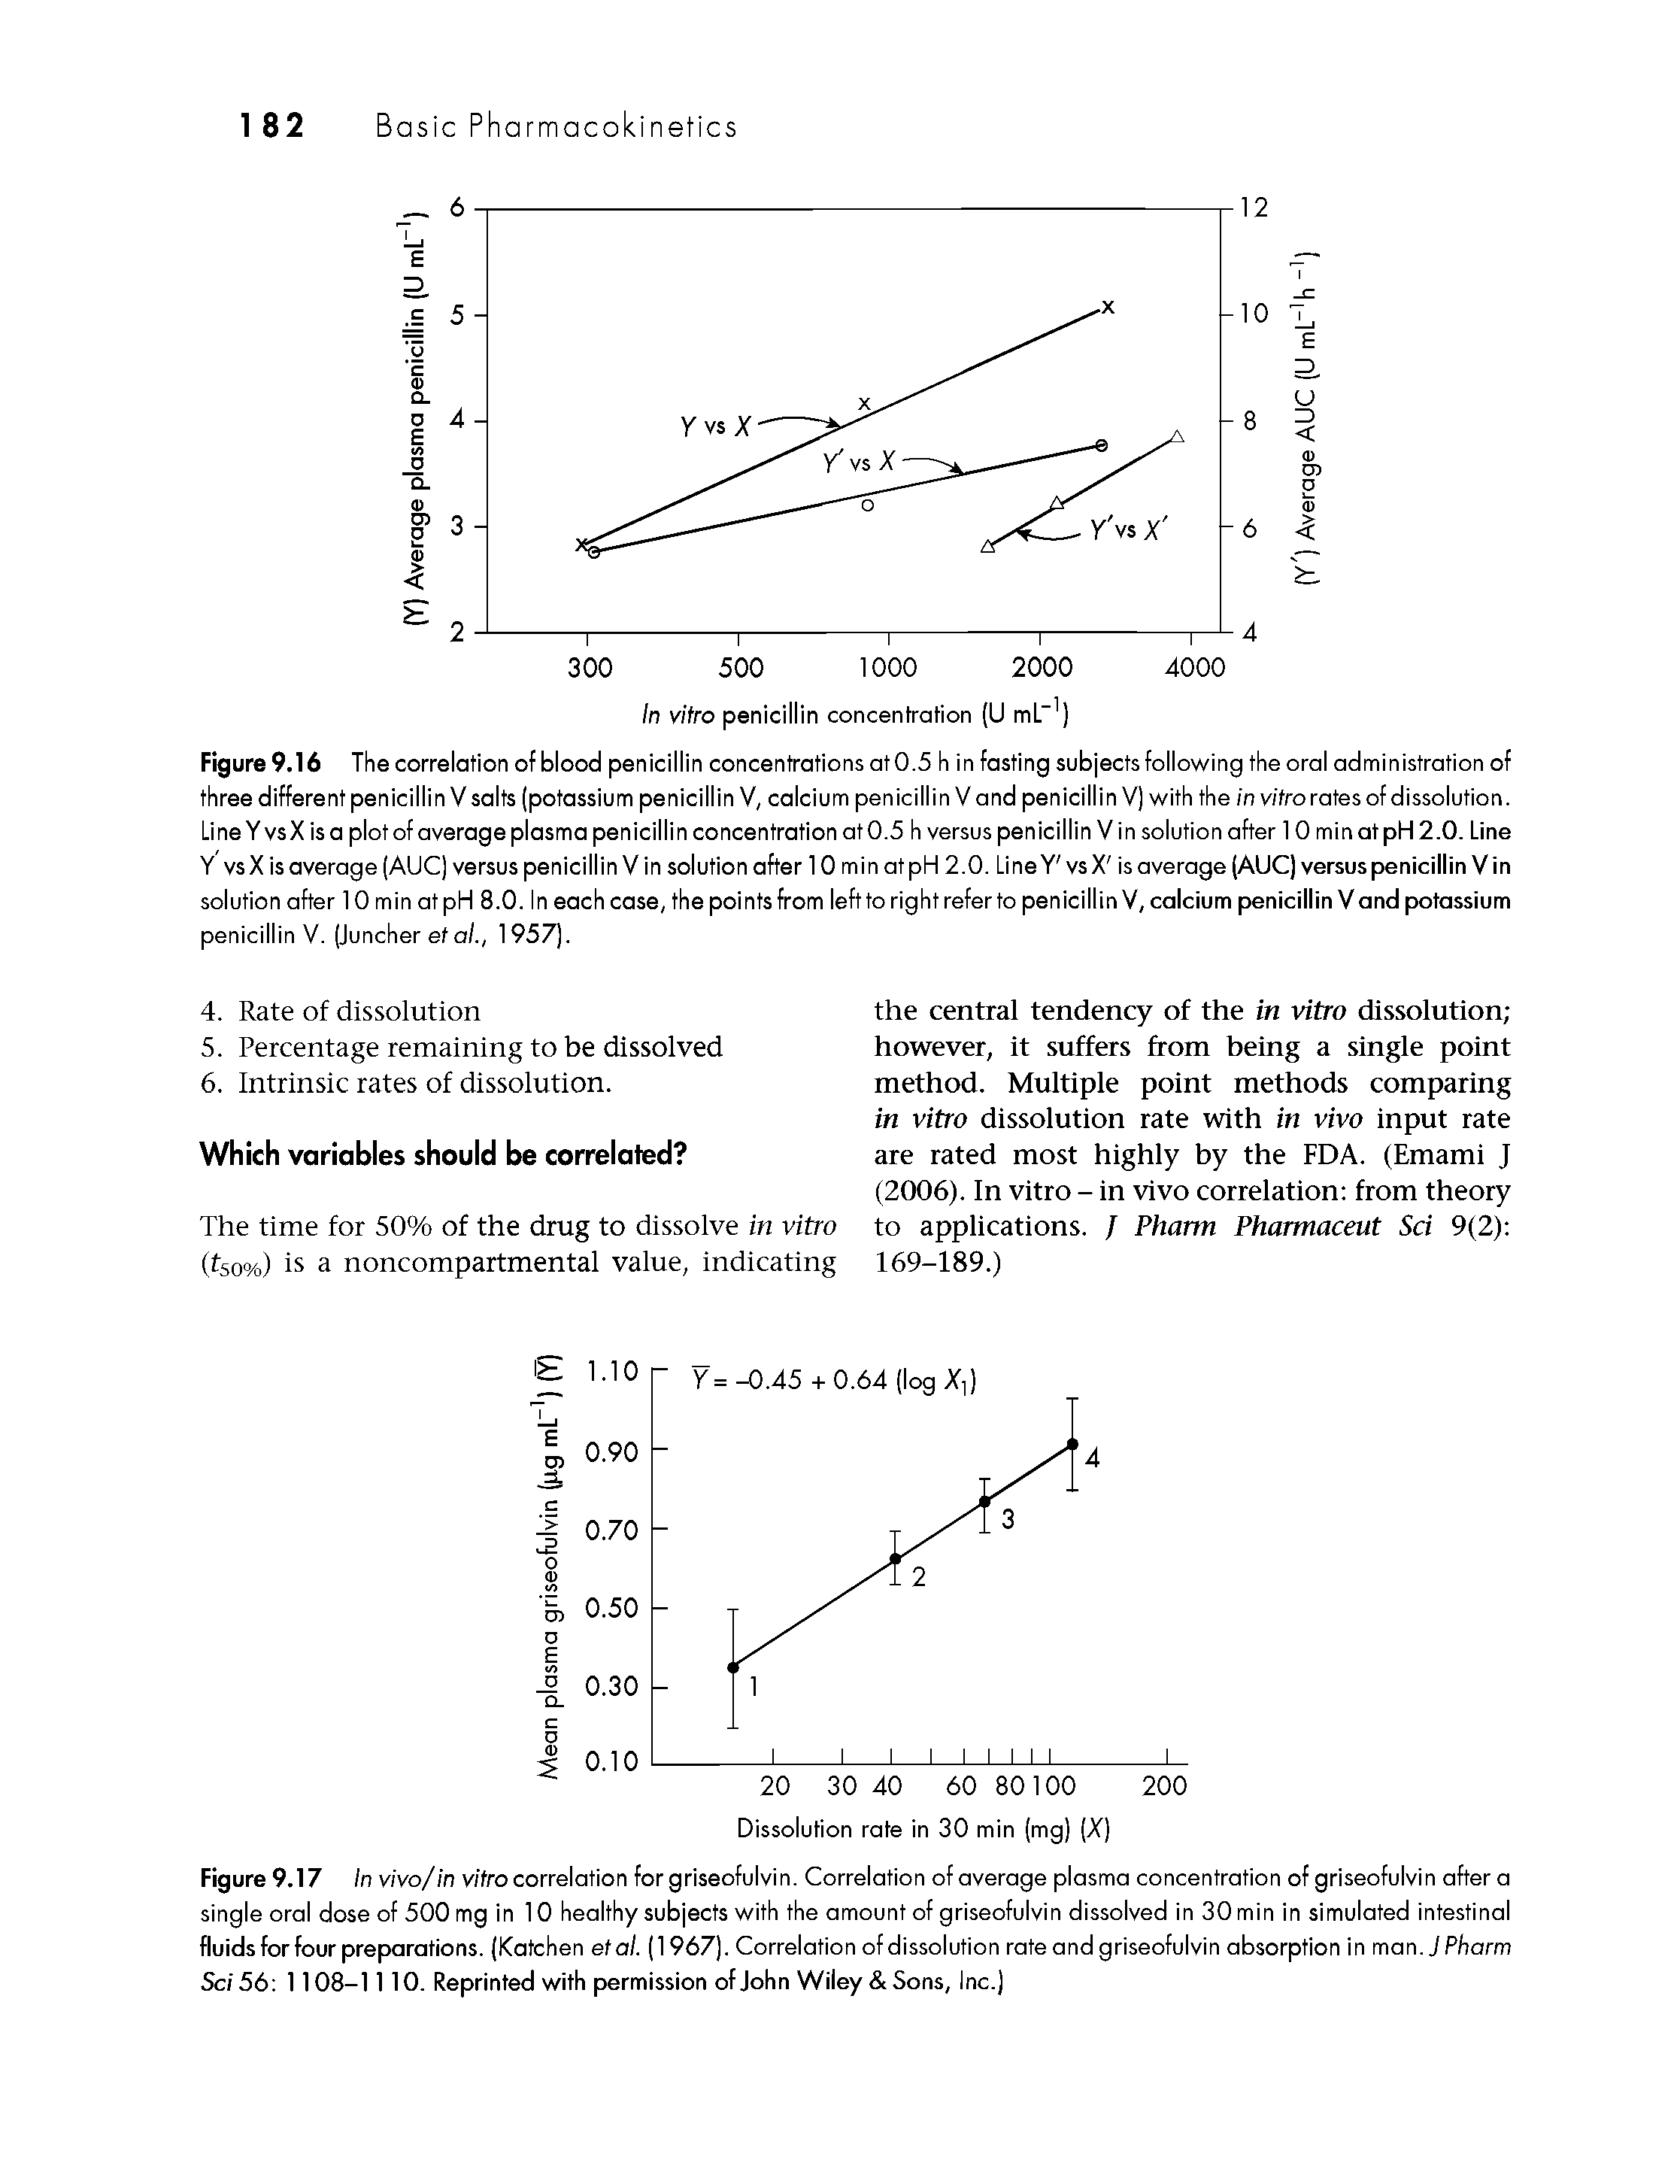 Figure 9.16 The correlation of blood penicillin concentrations at 0.5 h in fasting subjects following the oral administration of three different penicillin V salts (potassium penicillin V, calcium penicillin V and penicillin V) with the in v/trorates of dissolution. Line YvsX is a plot of average plasma penicillin concentration at 0.5 h versus penicillin V in solution after 10 min at pH 2.0. Line Y vs X is average (AUC) versus penicillin V in solution after 10 min at pH 2.0. Line Y vs X is average (ADC) versus penicillin V in solution after 10 min at pH 8.0. In each case, the points from left to right refer to penicillin V, calcium penicillin V and potassium penicillin V. (Juncher ef o/., 1957).